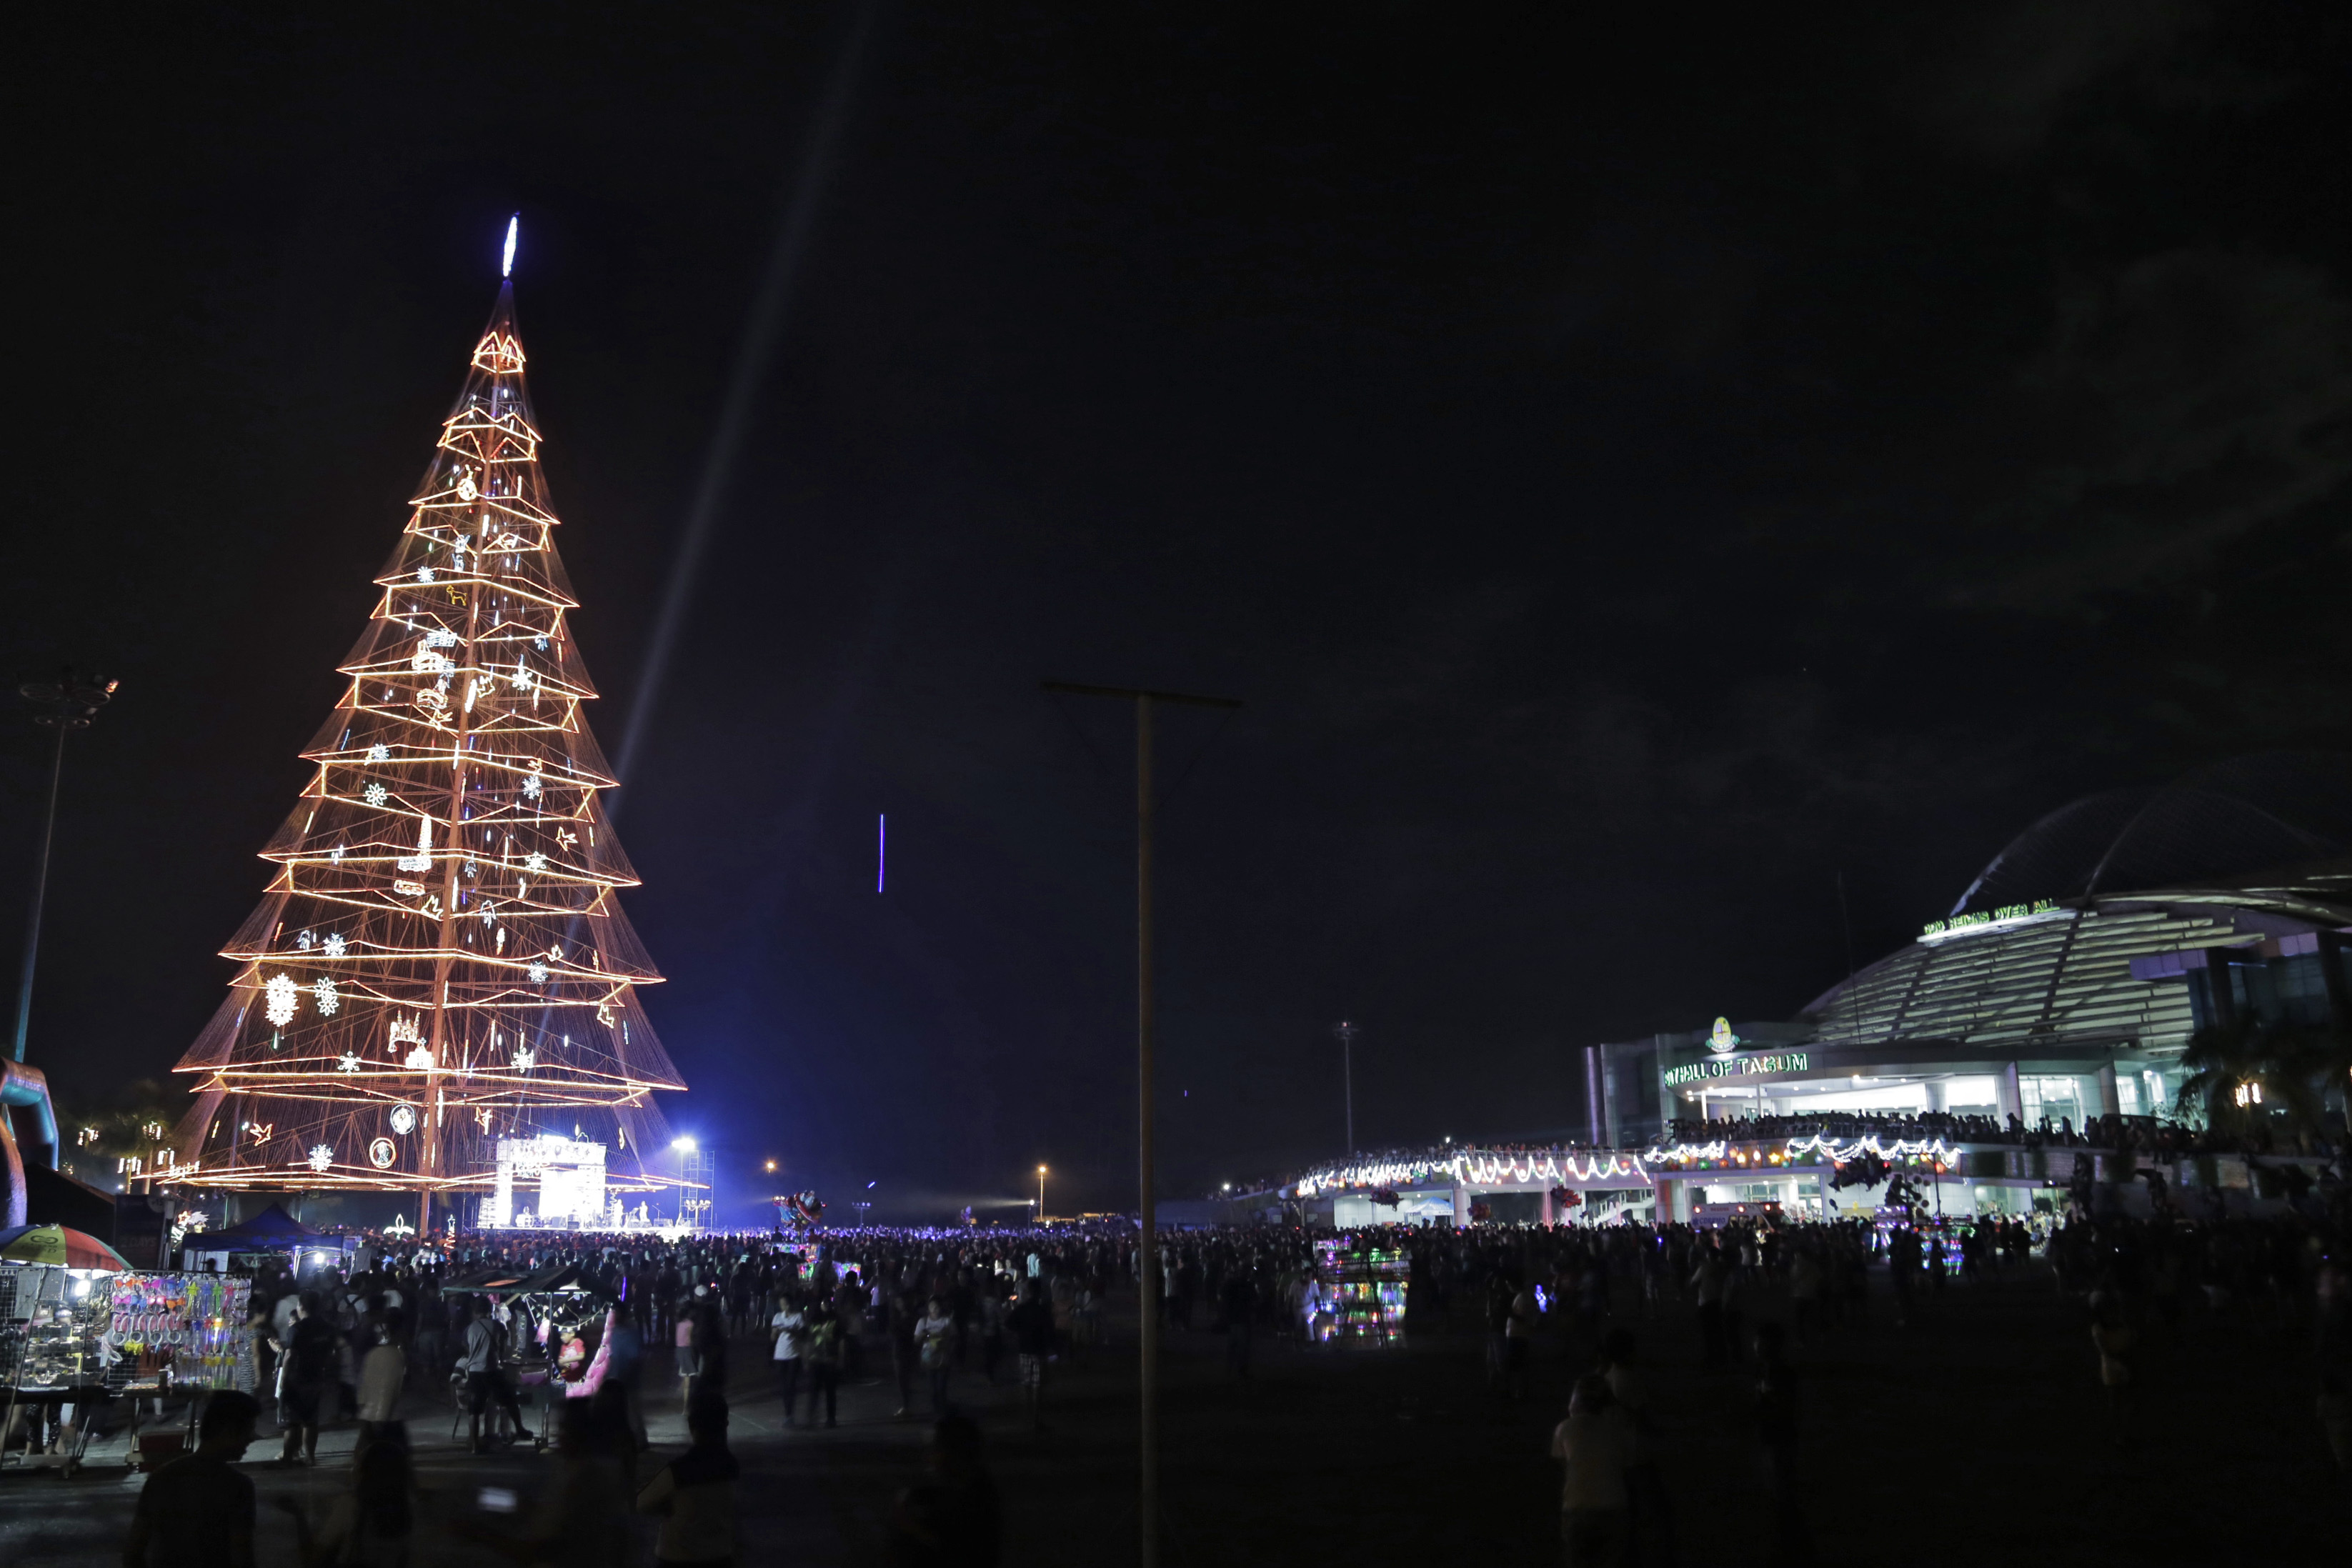 Tagum's two icons in one place – the giant holiday tree (left) and the city's new government center (right). Photo by Leo Timogan 